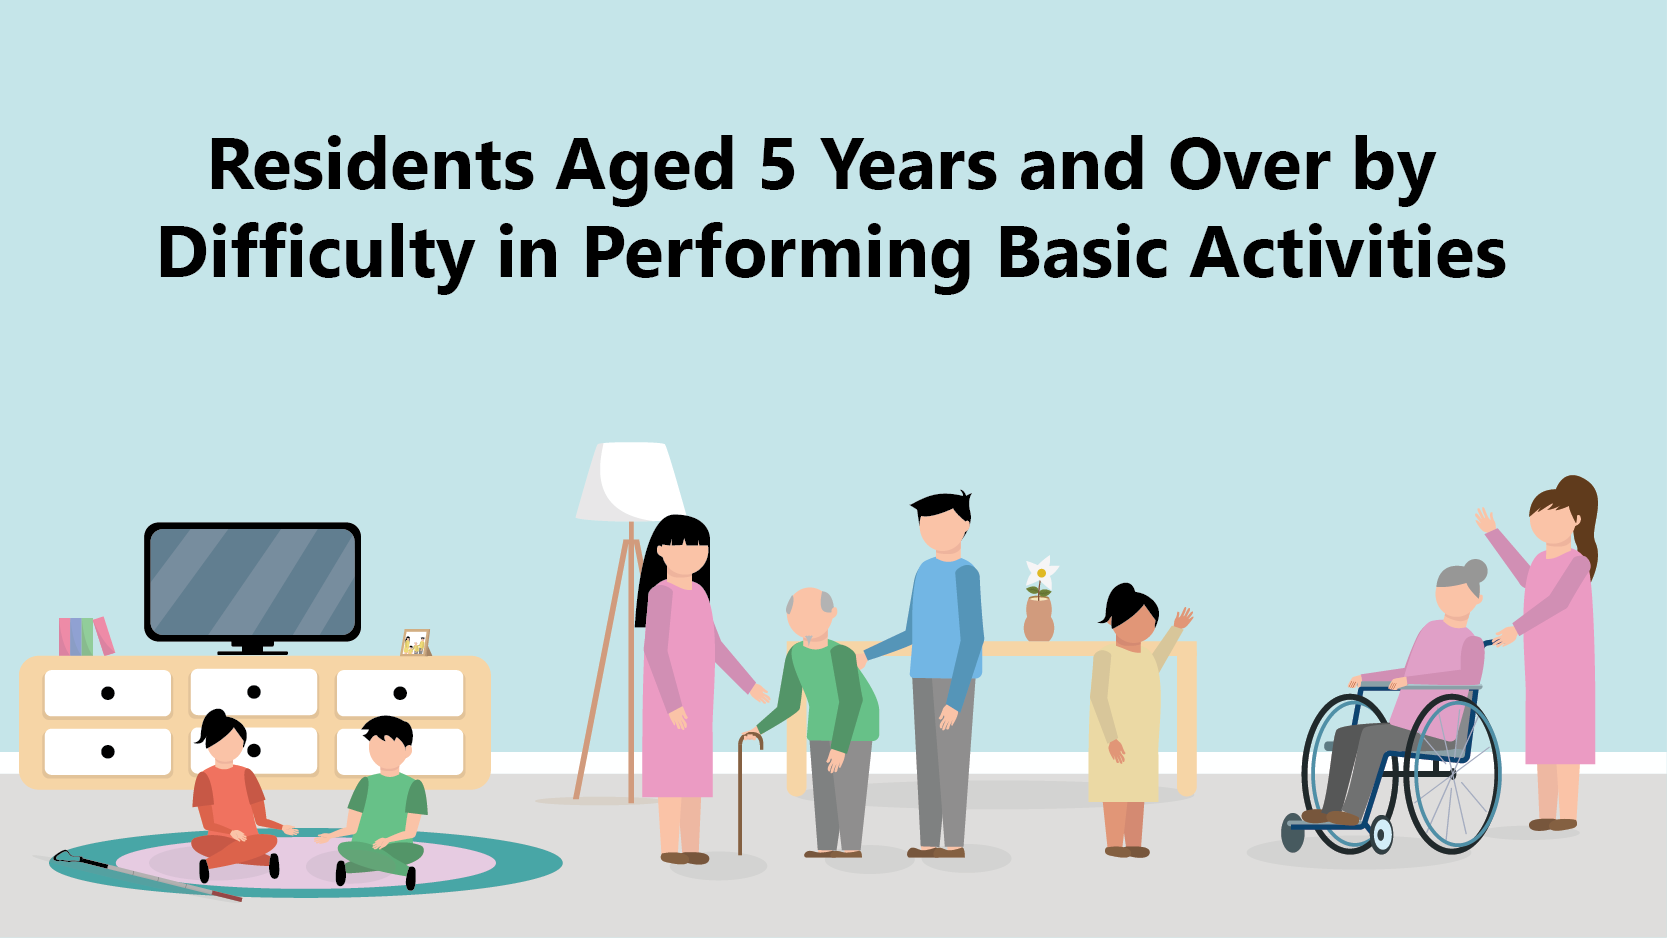 Residents Aged 5 Years and Over by Difficulty in Performing Basic Activities Dashboard